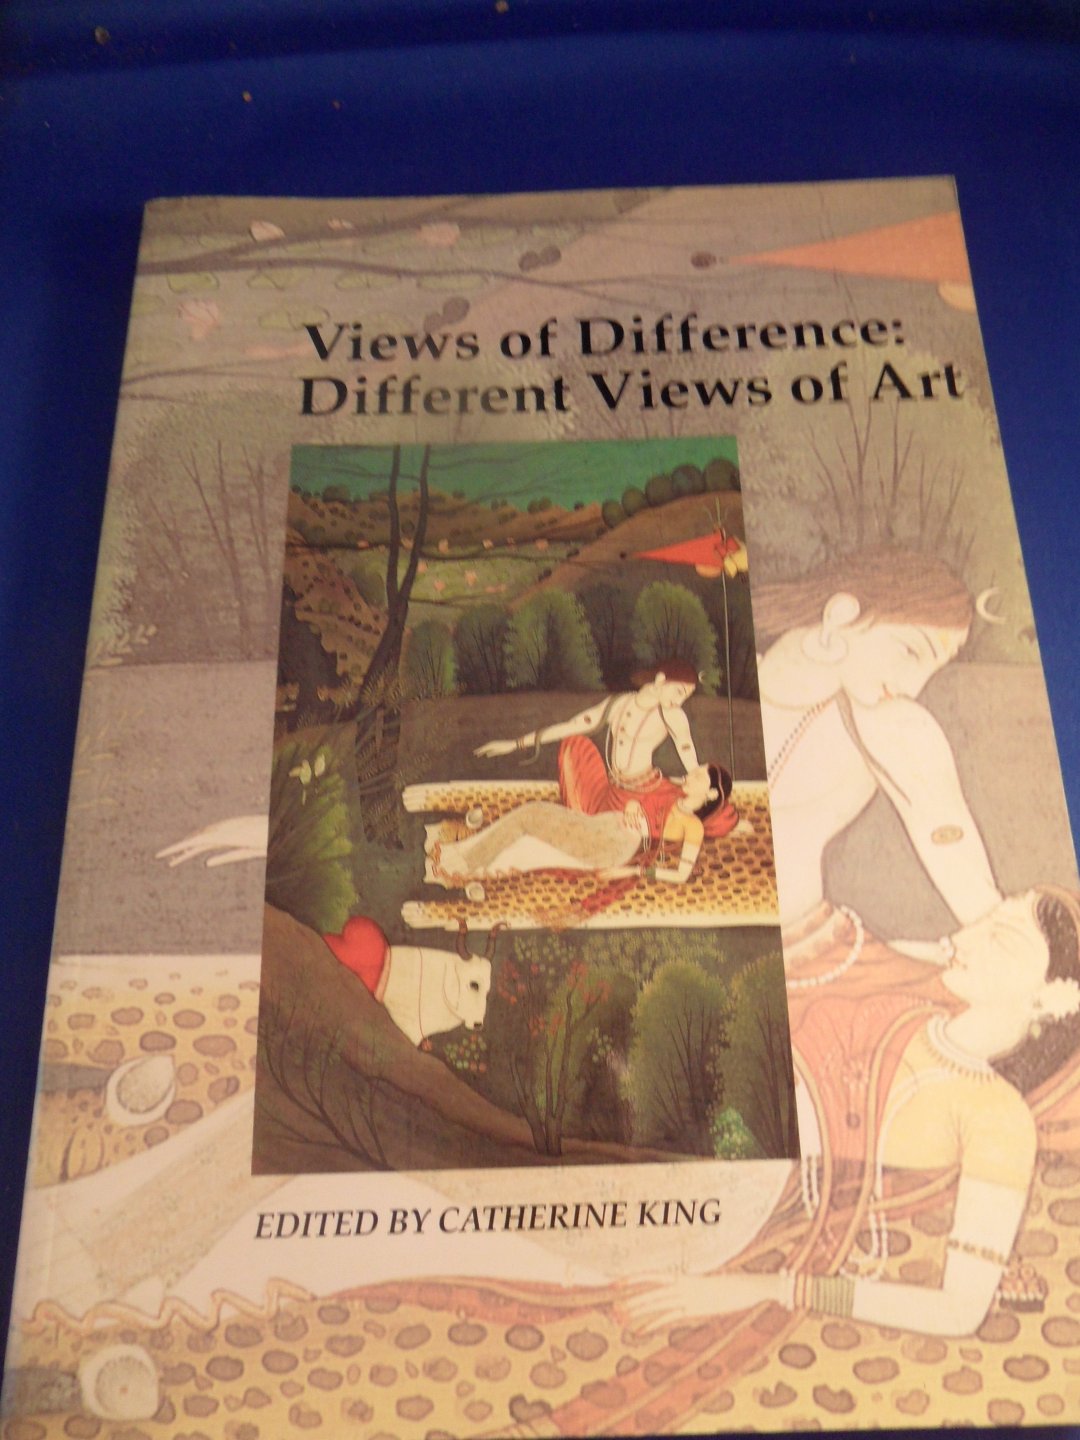 King, Catherine - Views of Difference -Different Views of Art